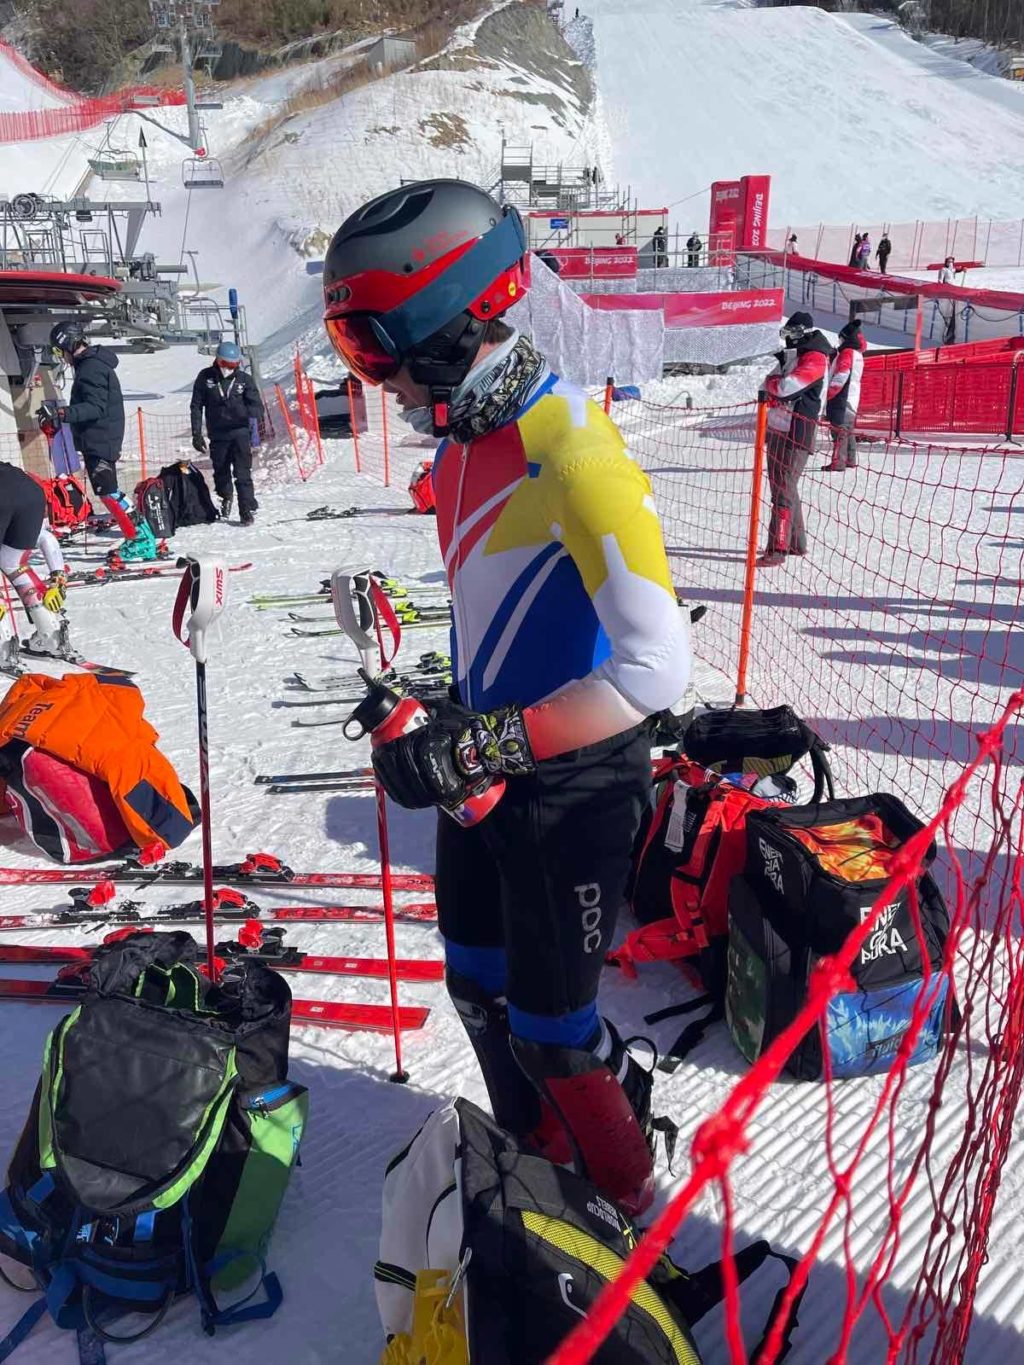 Asa Miller during one of his training sessions at the National Alpine Skiing Center on Xiaohaituo Mountain in China for the Winter Olympics. | Photo from Philippine Olympic Committee.